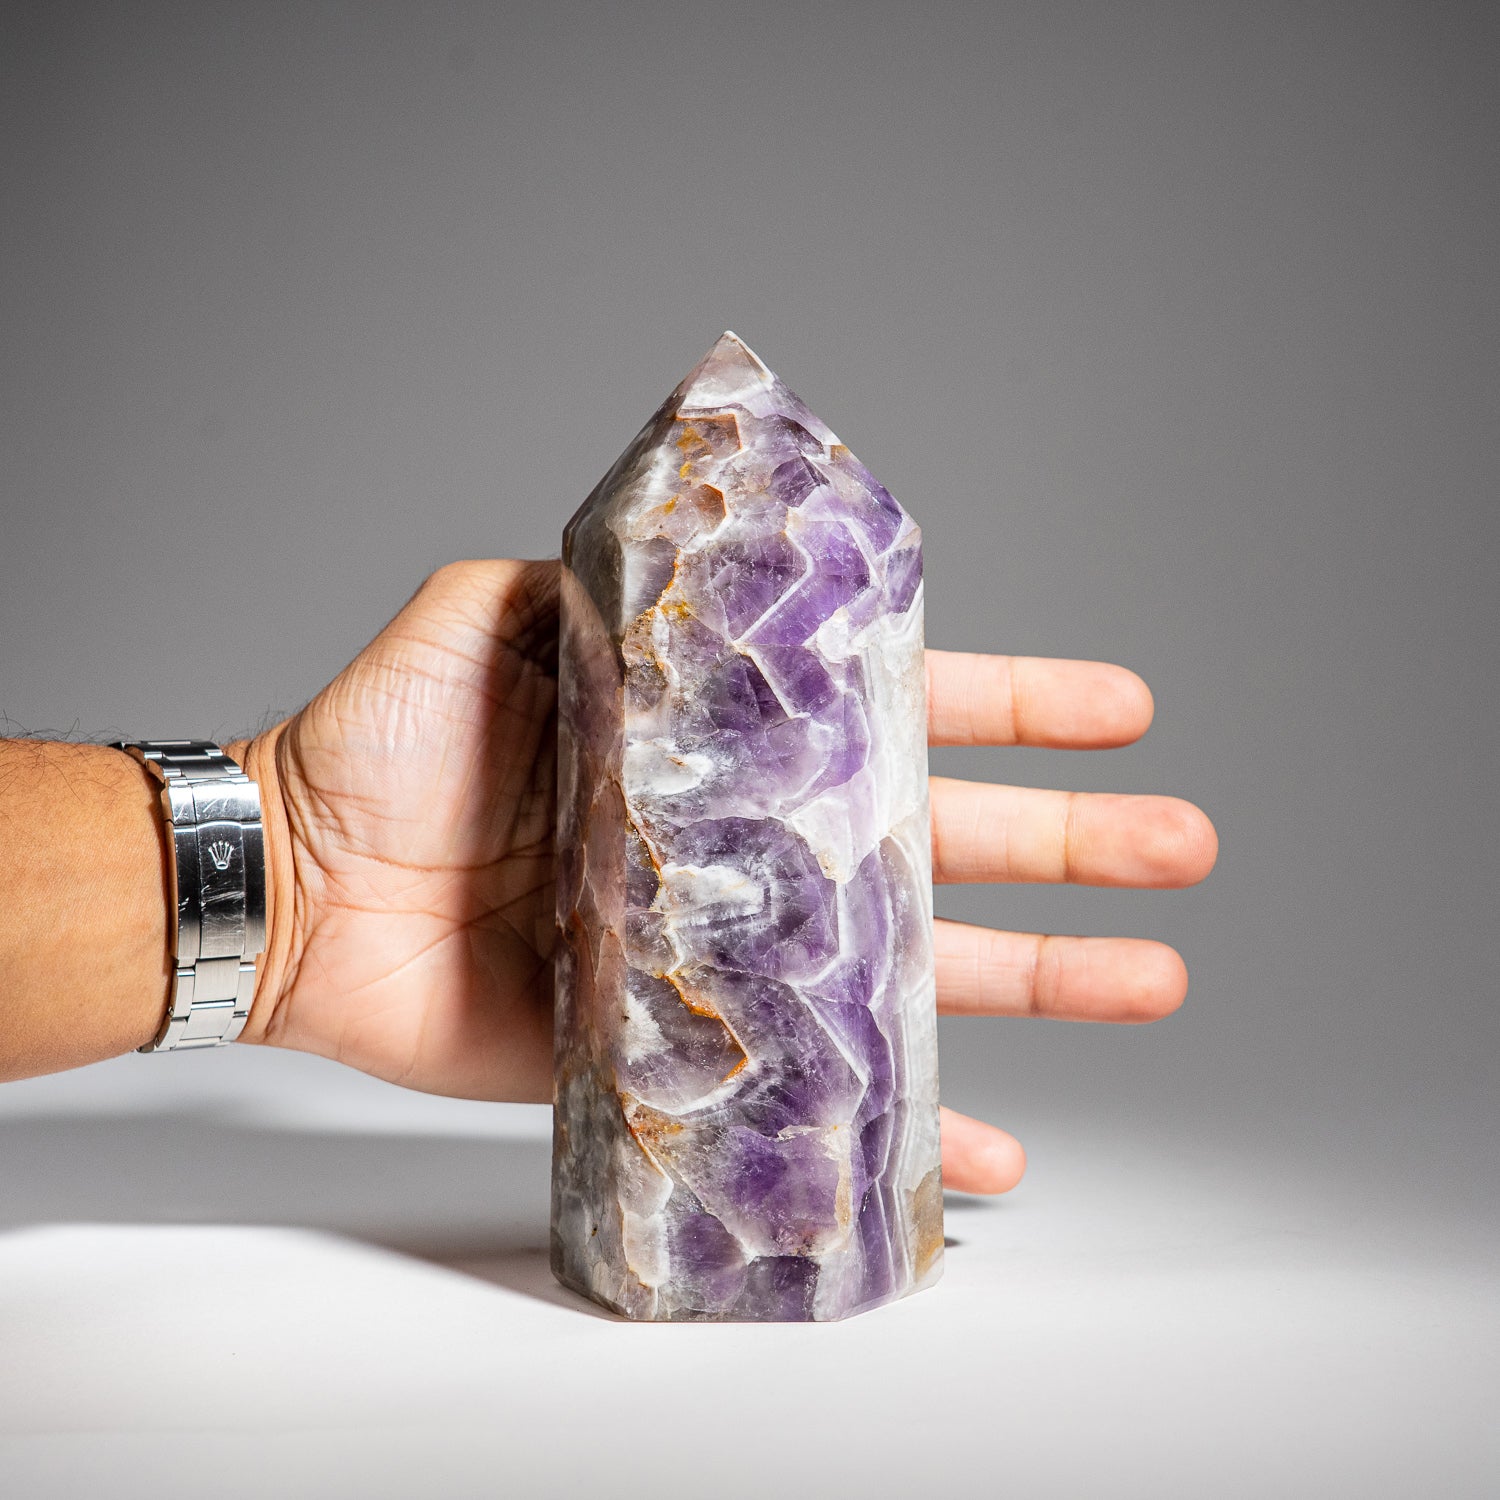 Polished Amethyst Crystal Point From Brazil (2.5 lbs)